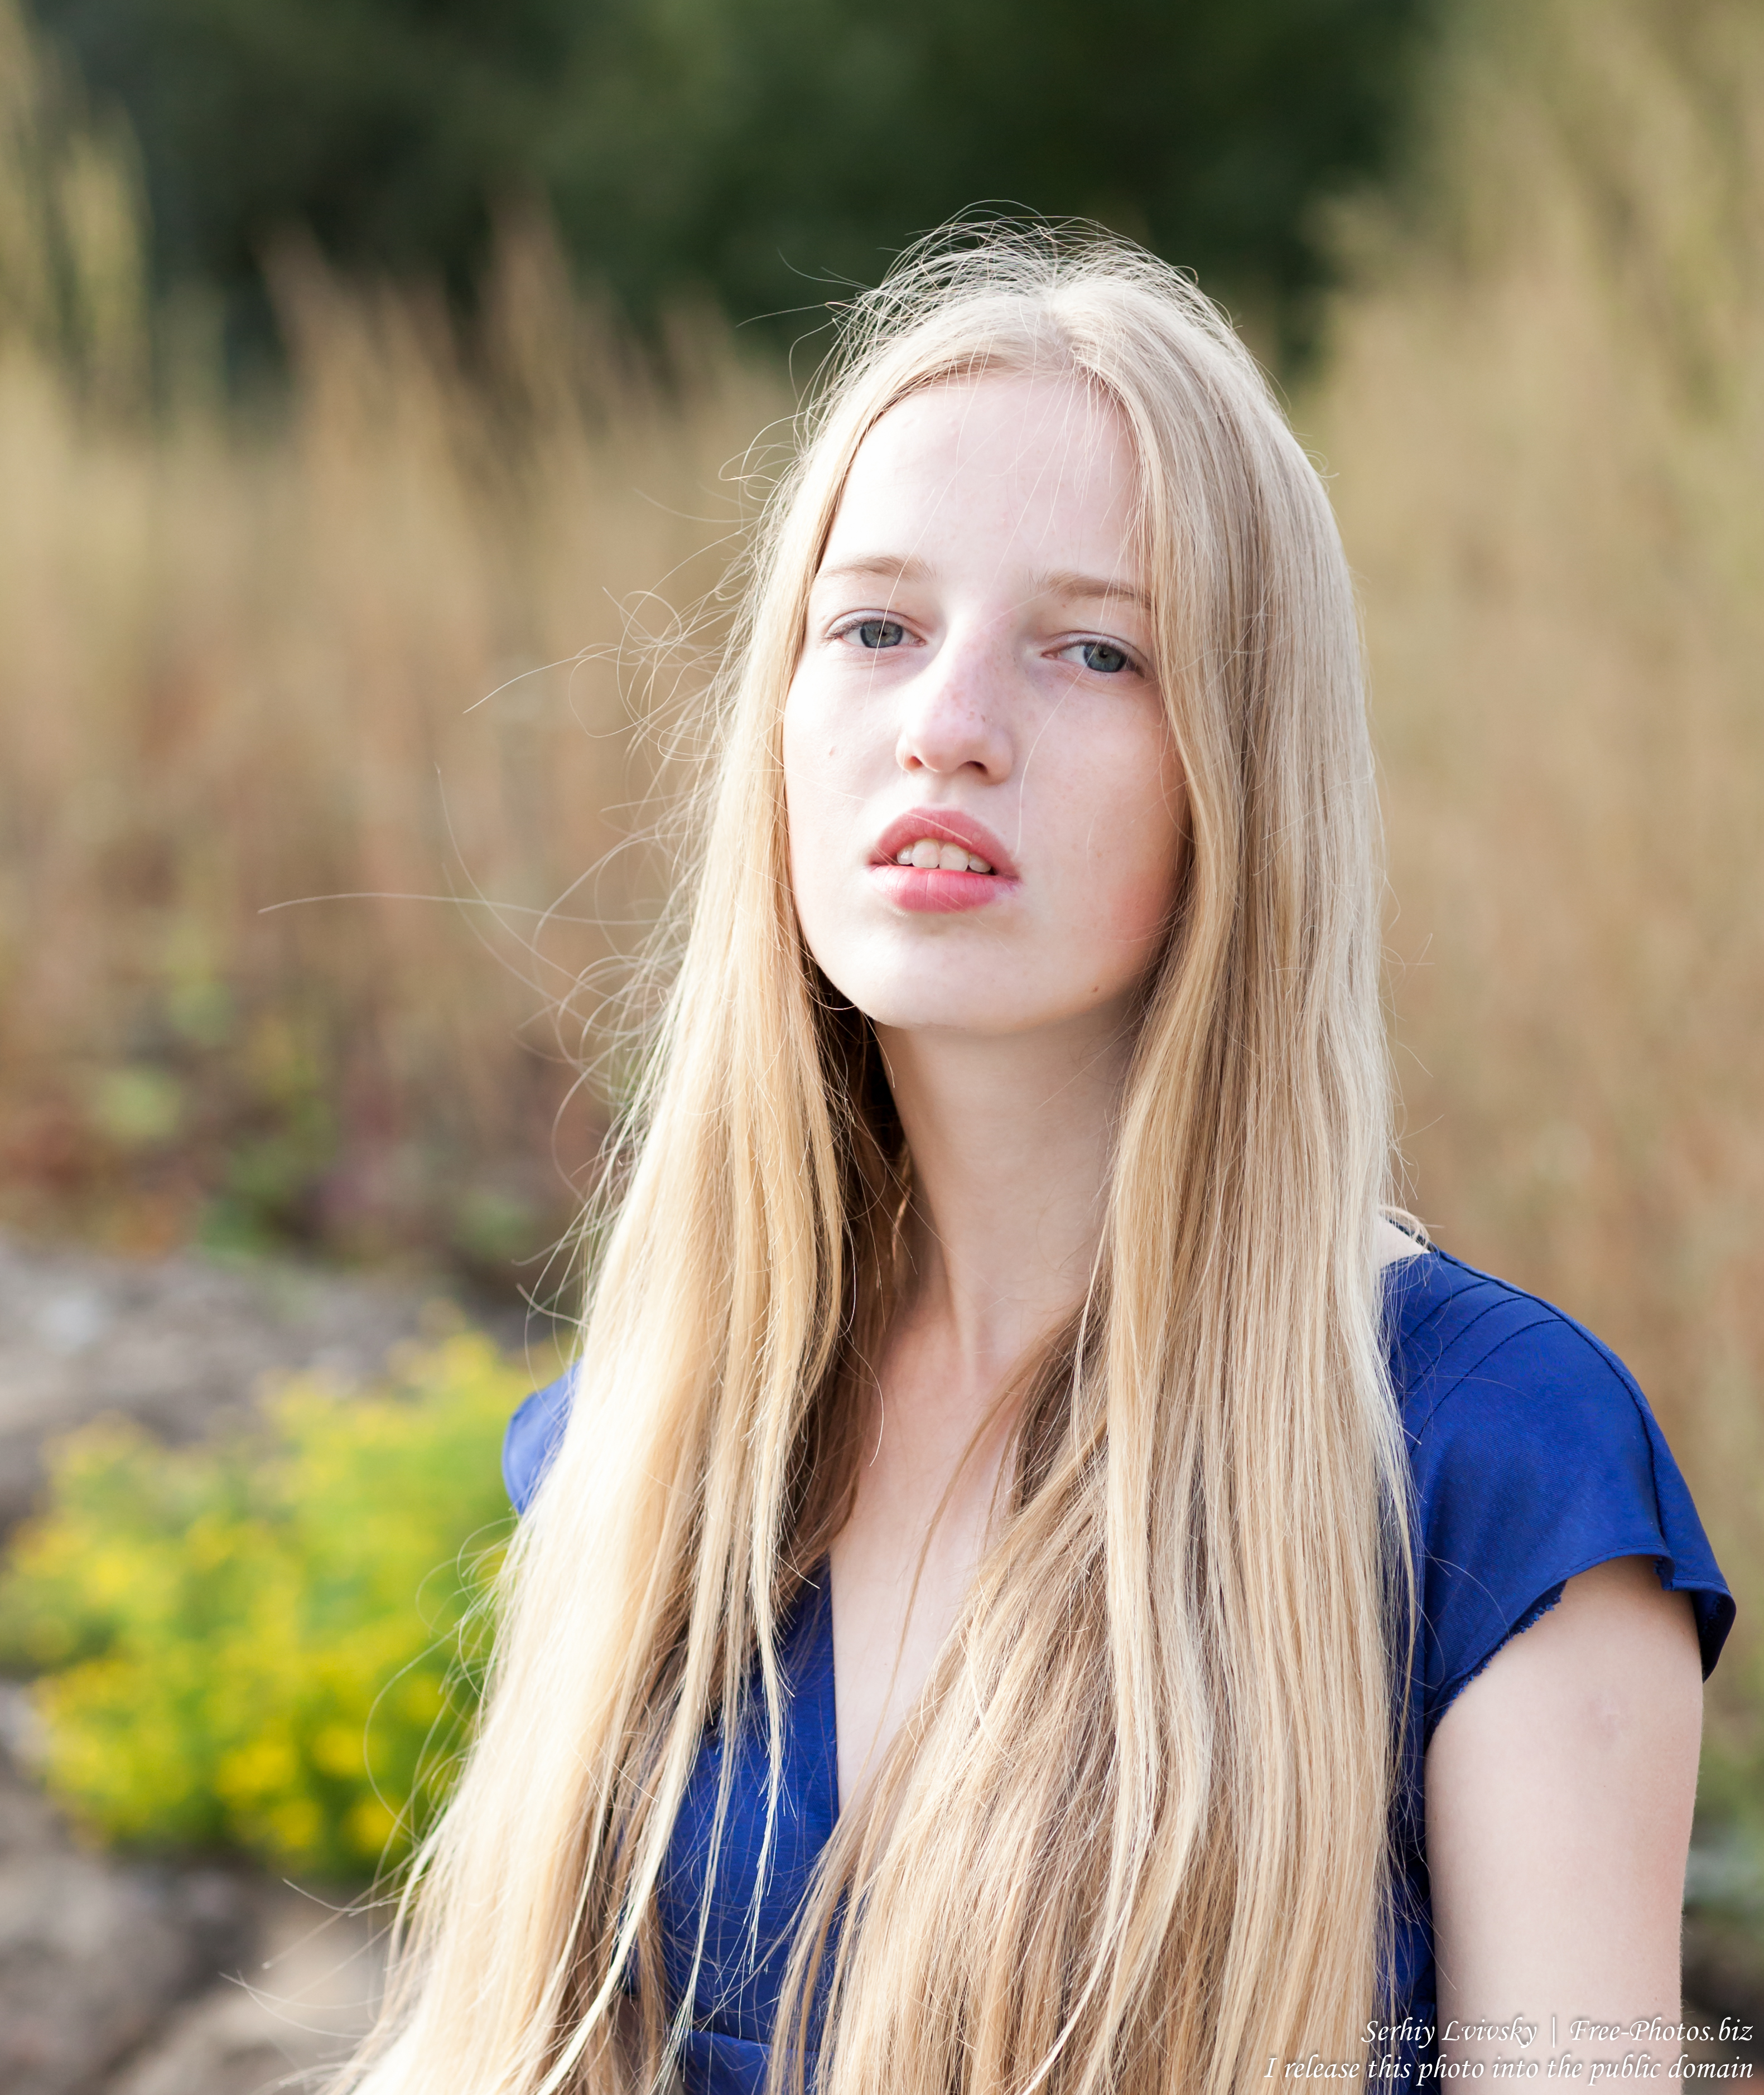 a 17-year-old Catholic natural blond girl photographed in September 2016 by Serhiy Lvivsky, picture 24